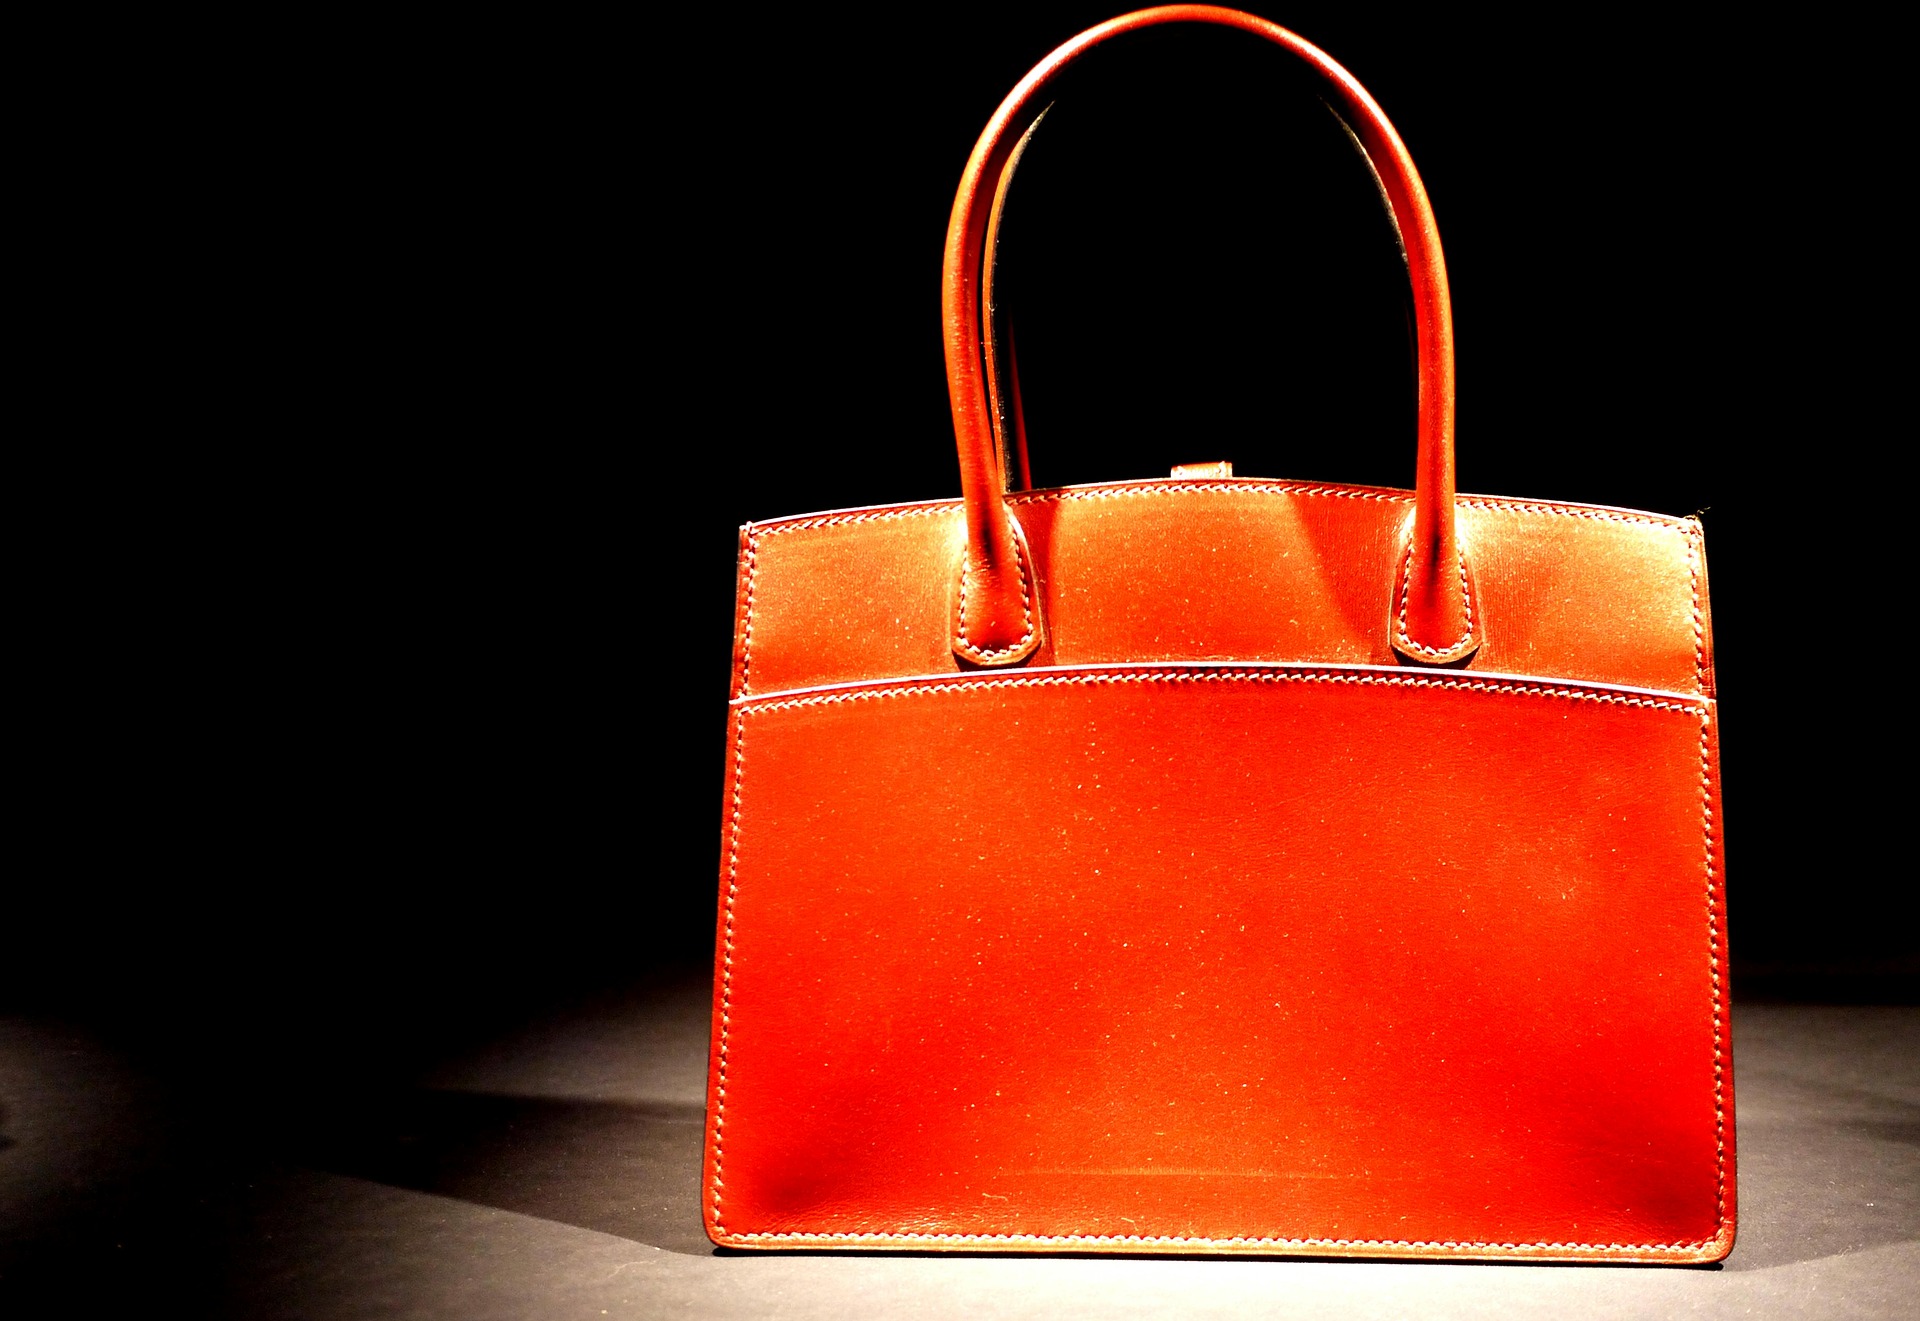 These are the 10 most powerful luxury companies on Earth